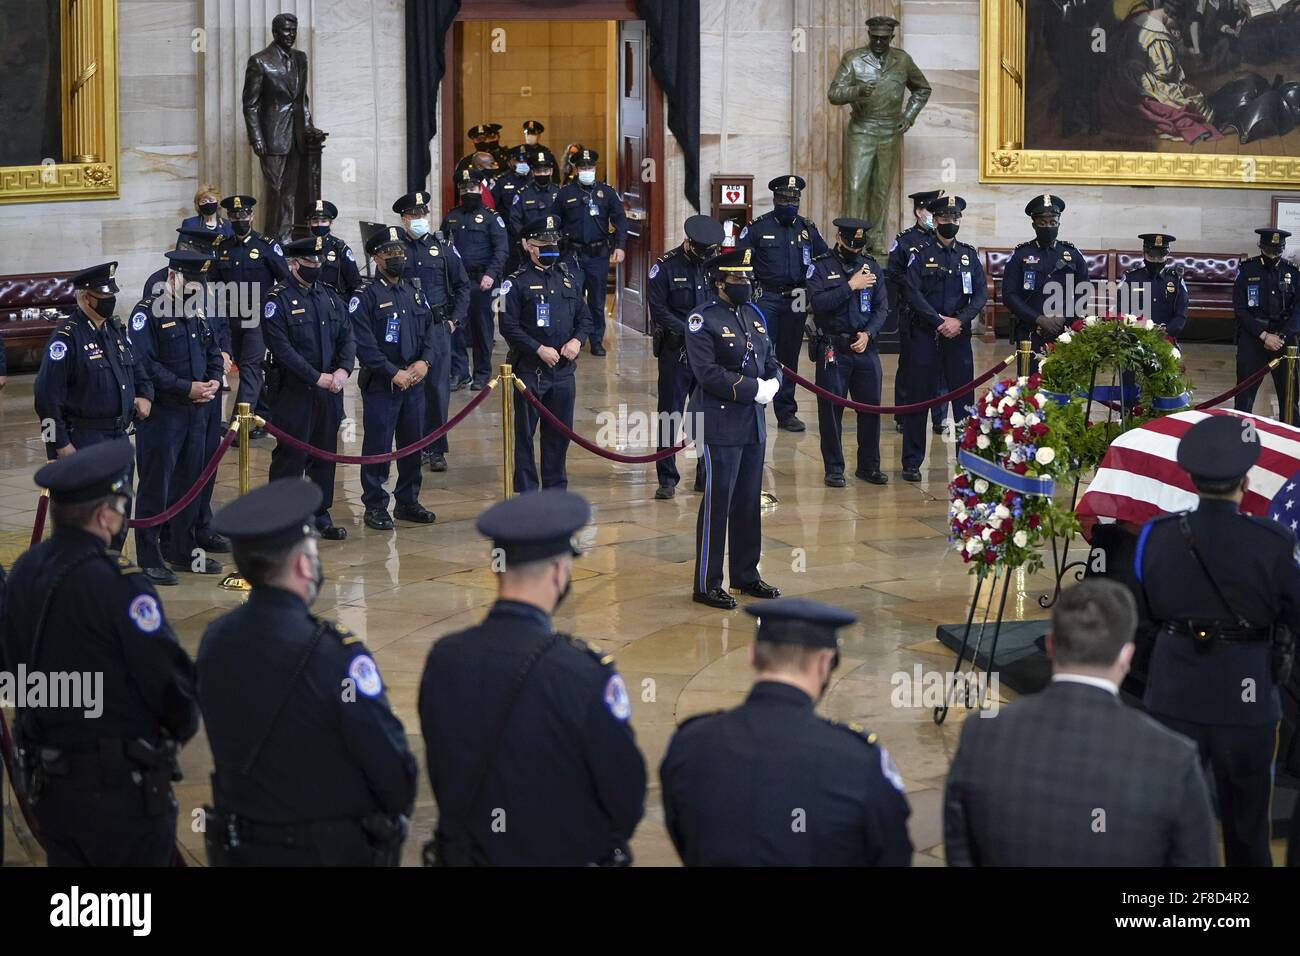 Capitol Police officers pay their respects at the casket of the late U.S. Capitol Police officer William 'Billy' Evans during a memorial service as Evans lies in honor in the Rotunda at the U.S. Capitol in Washington DC, on Tuesday April 13, 2021. Evans was killed in the line of duty during the attack outside the U.S. Capitol on April 2. Pool photo by Drew Angerer/UPI Credit: UPI/Alamy Live News Stock Photo